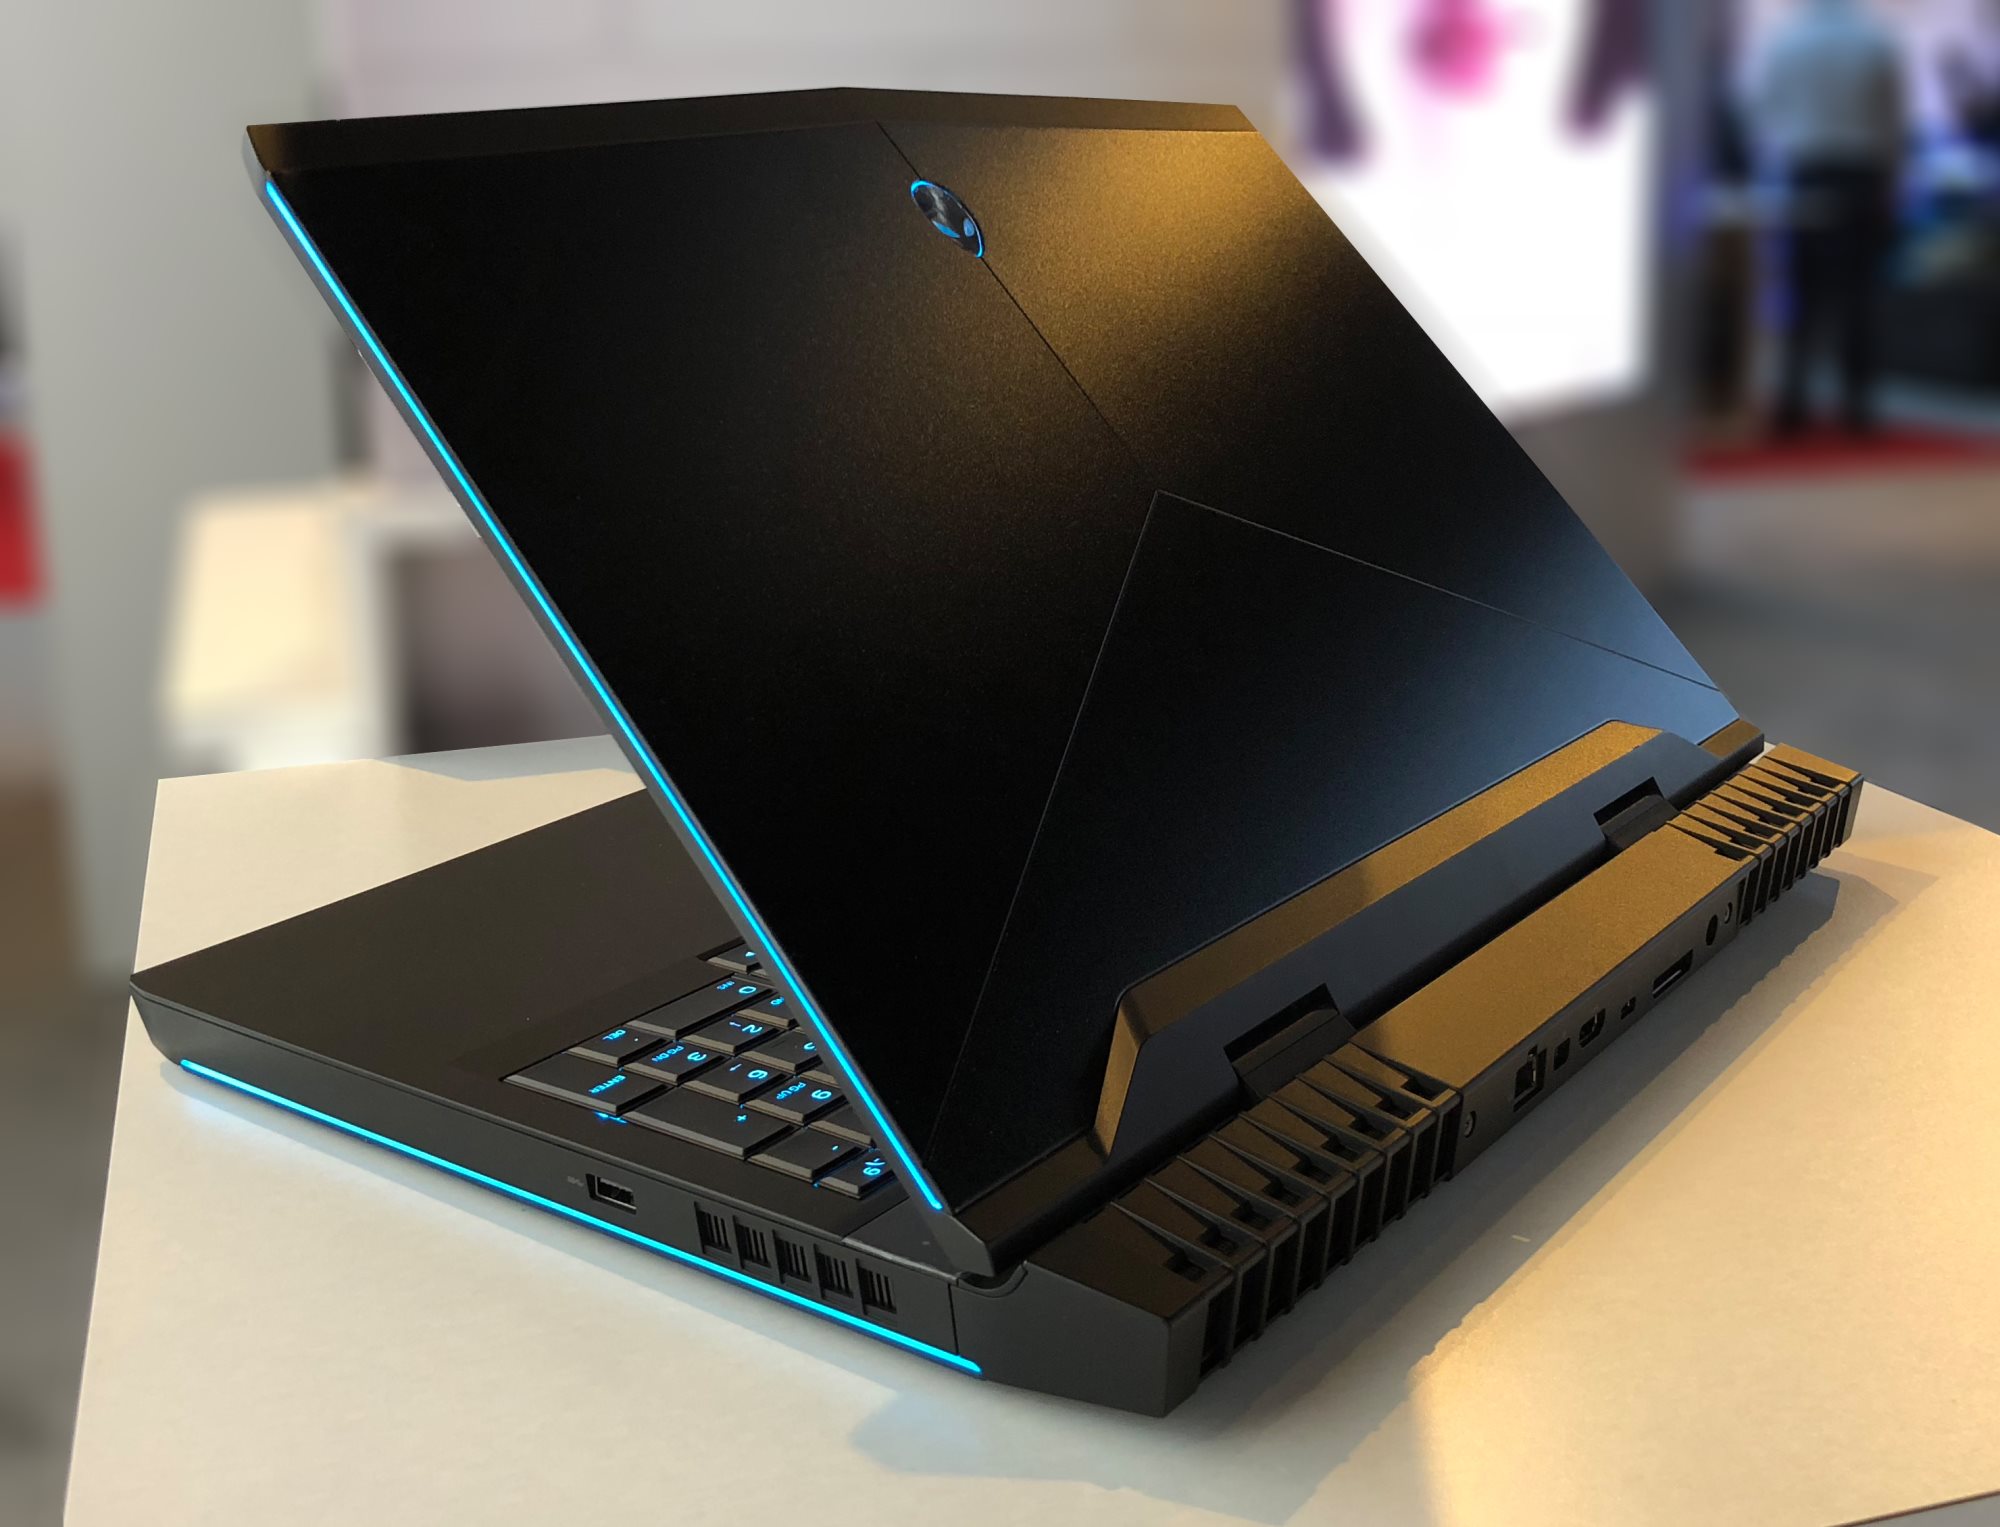 Alienware Laptops: 15R4 and 17R5 - Dell's Spring Range: New 8th 